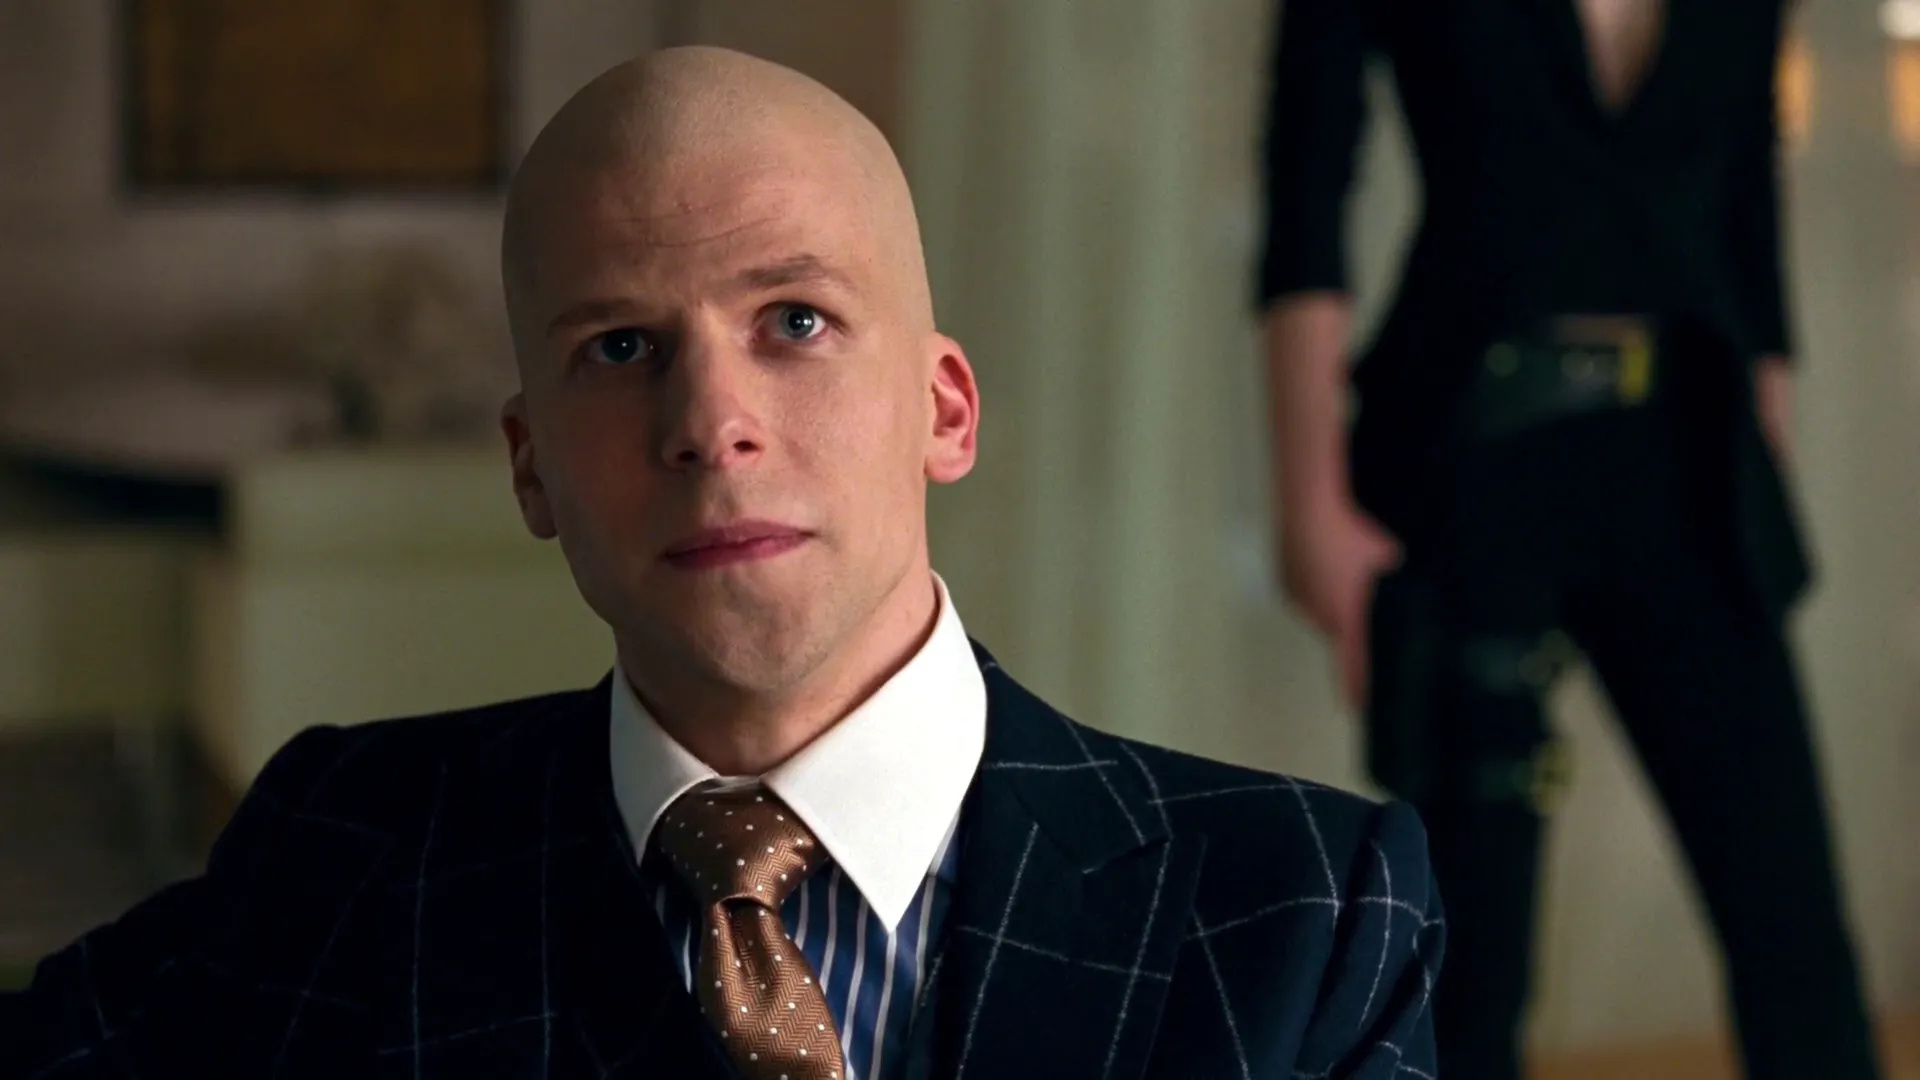 Lex Luthor: Jesse Eisenberg, A genius billionaire and the founder and CEO of LexCorp. 1920x1080 Full HD Background.